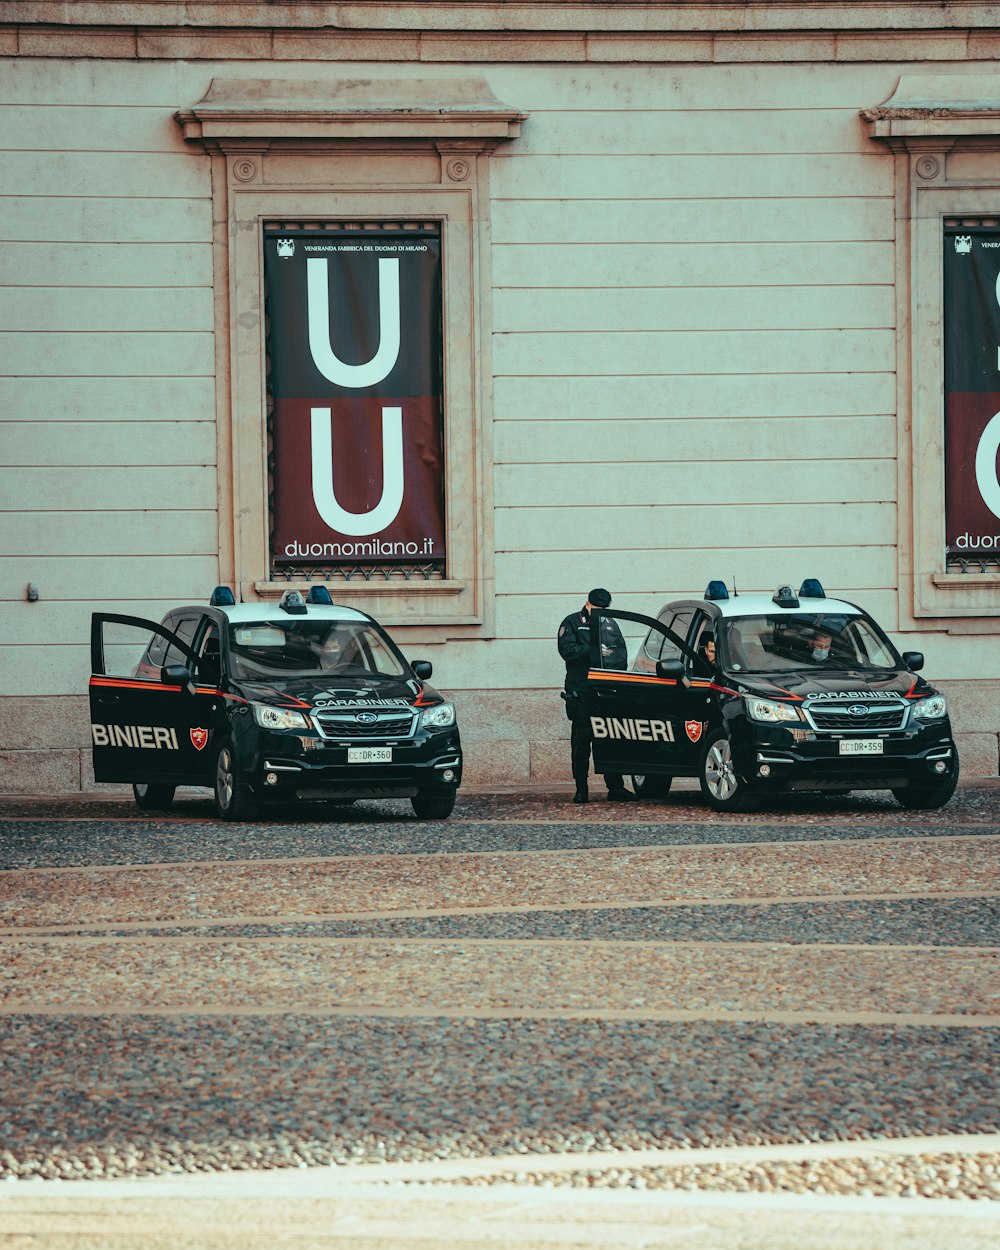 a couple of police cars parked next to each other